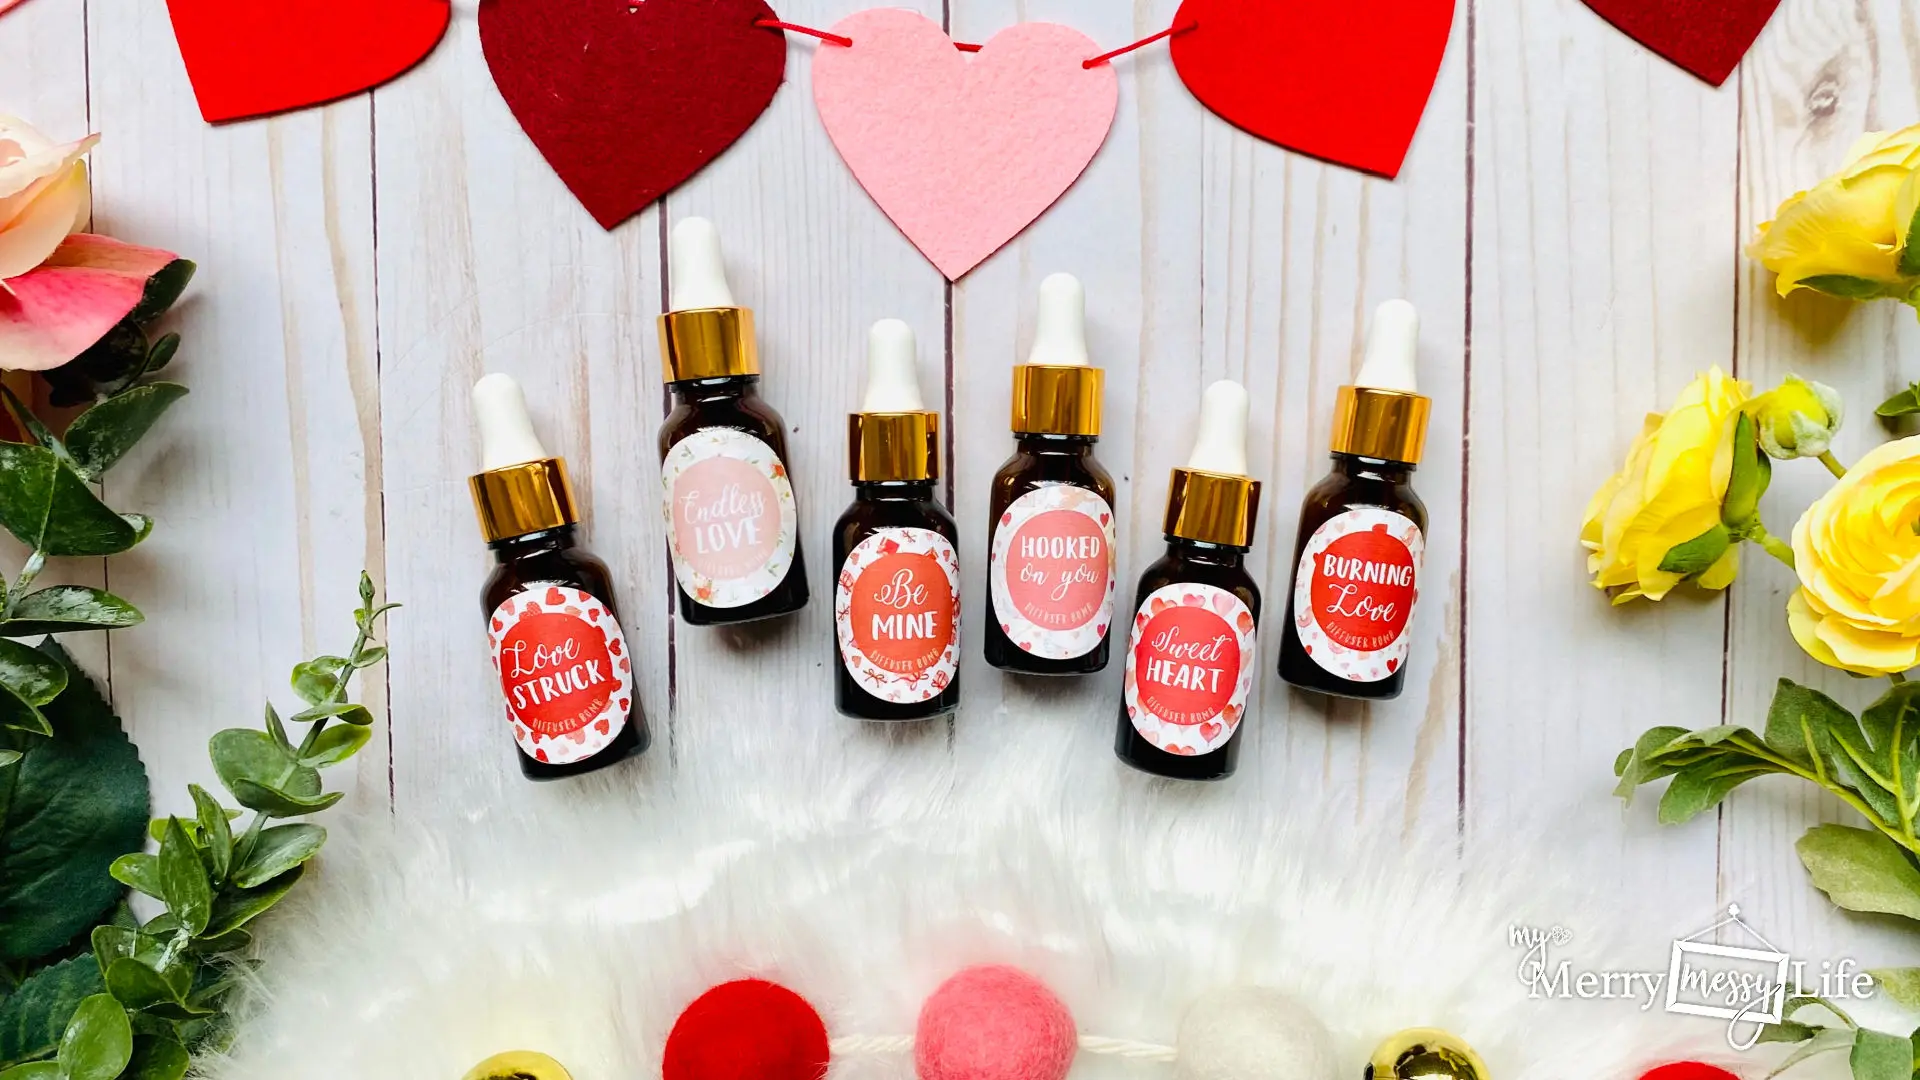 Love is In the Air with Valentine’s Diffuser Bomb Recipes